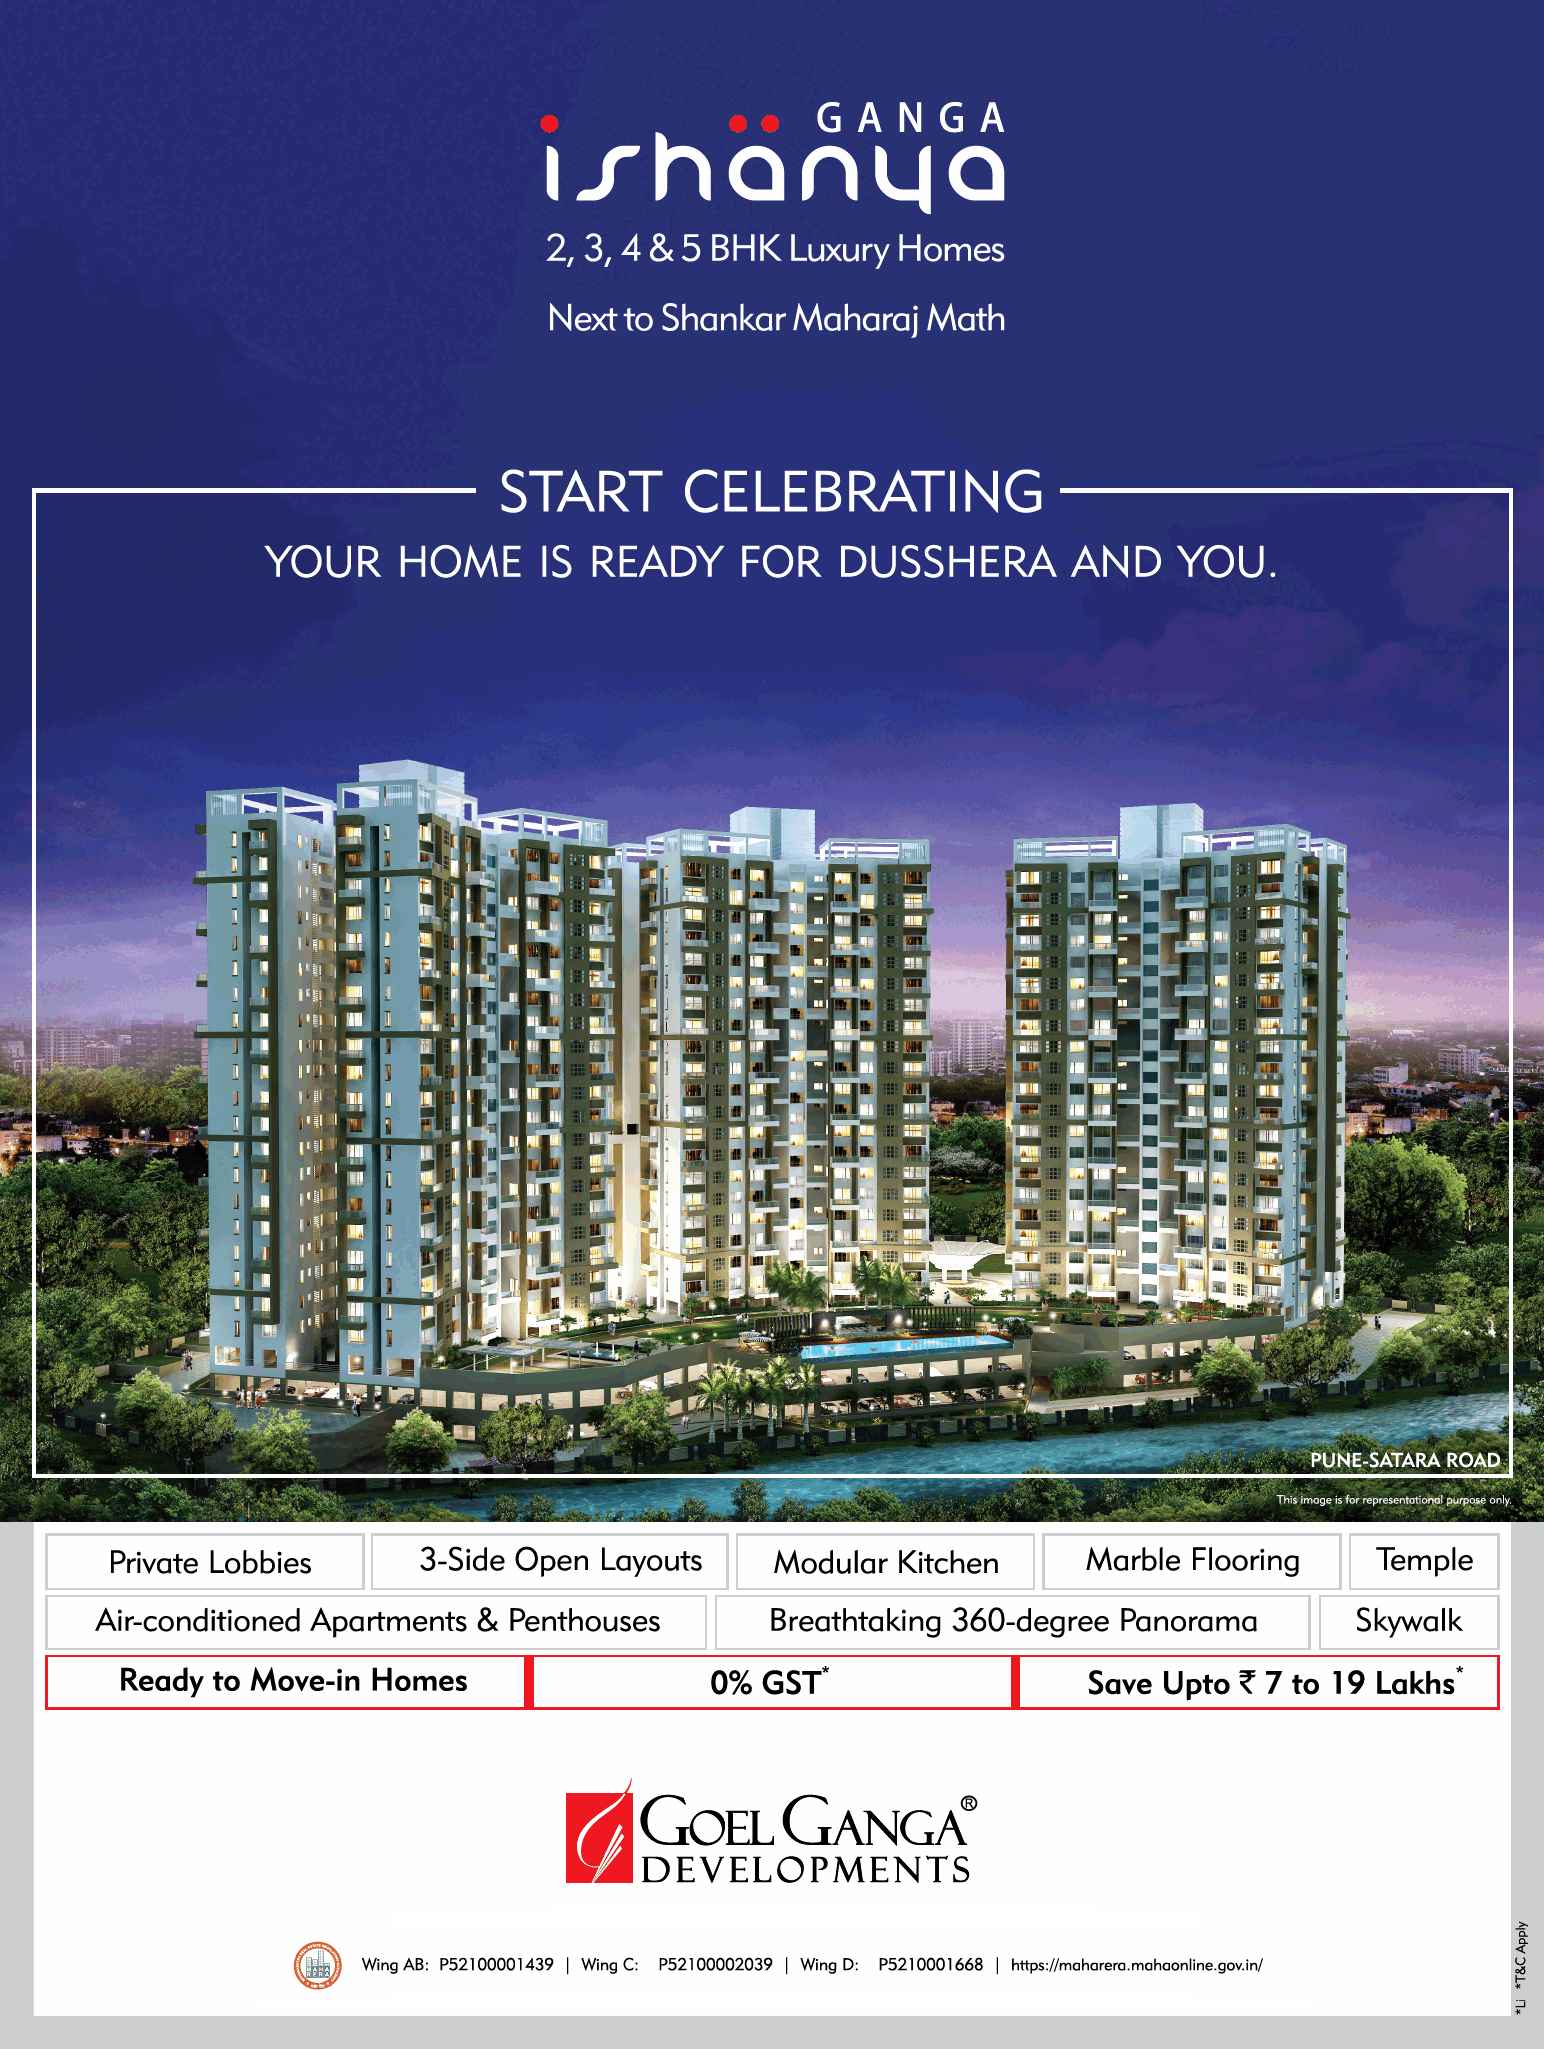 Save up to Rs. 7 to 19 Lakhs by booking home at Ganga Ishanya in Pune Update